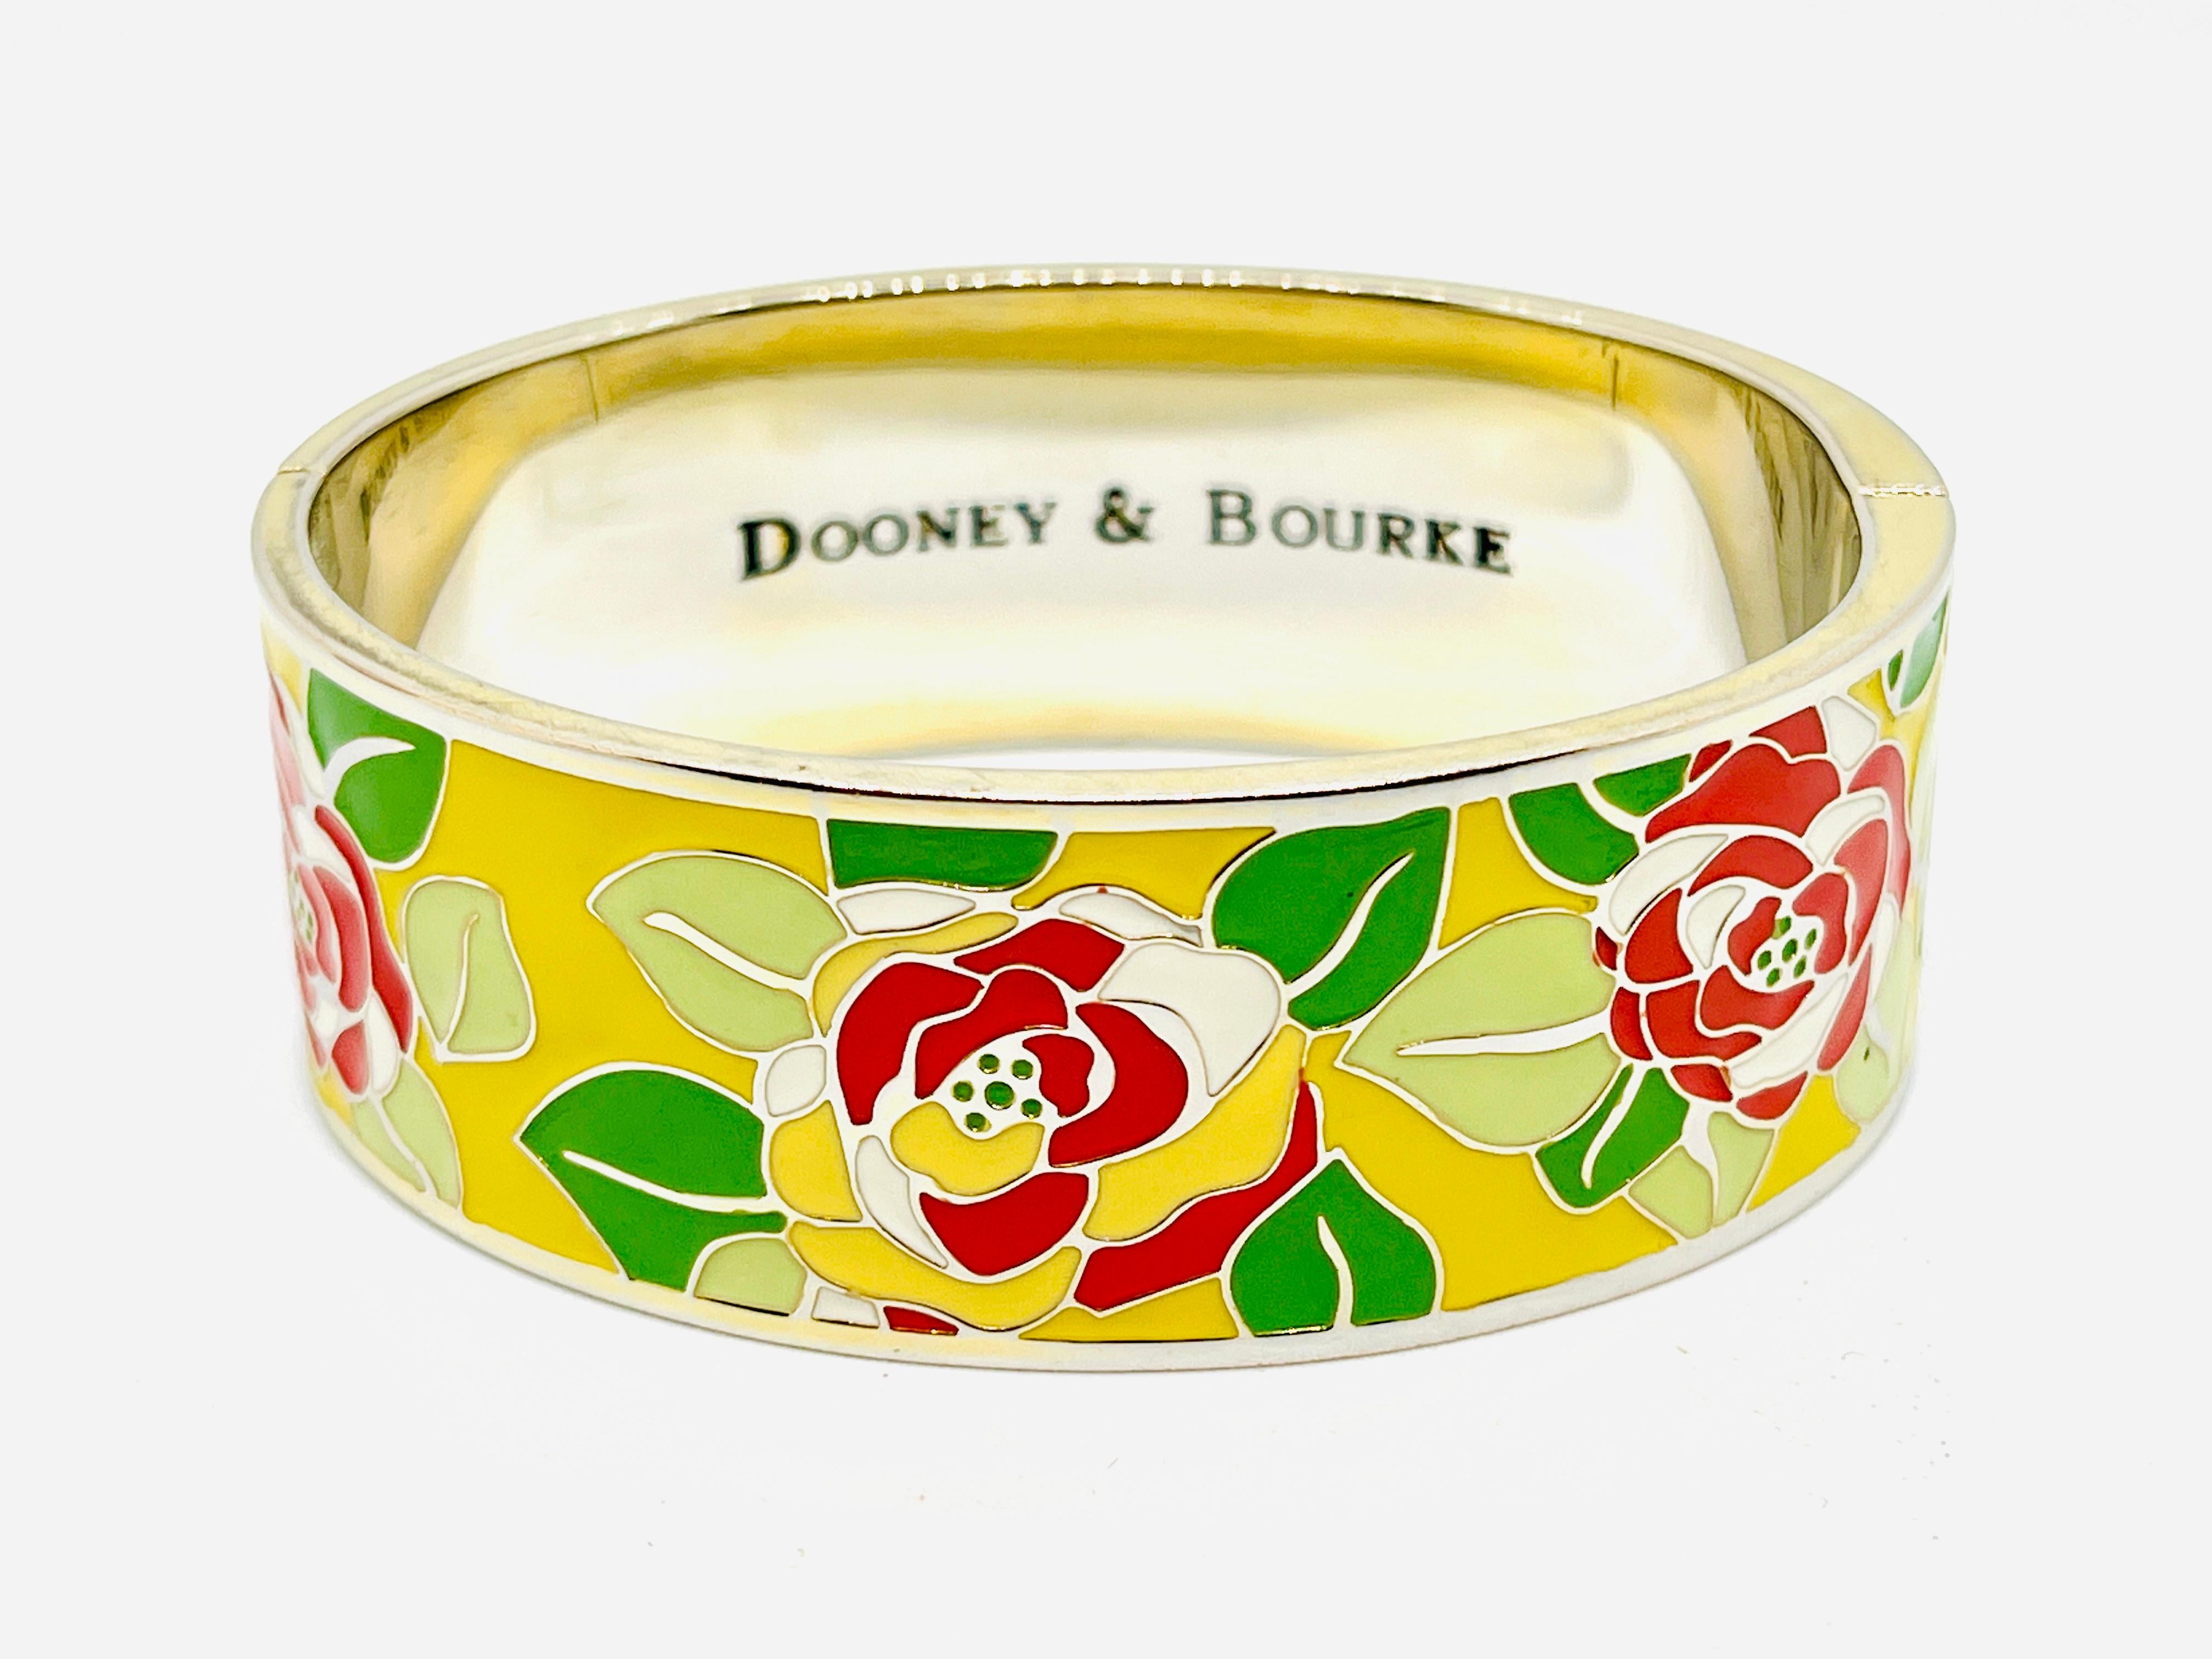 Heat-set enamel yellow rose garden clamp bracelet two maker's marks. Updated cloisonné, features red, yellow, and white rose petals on two shades on green leaves. One on the magnetic closure and one that is stamped on the inside of the bracelet.